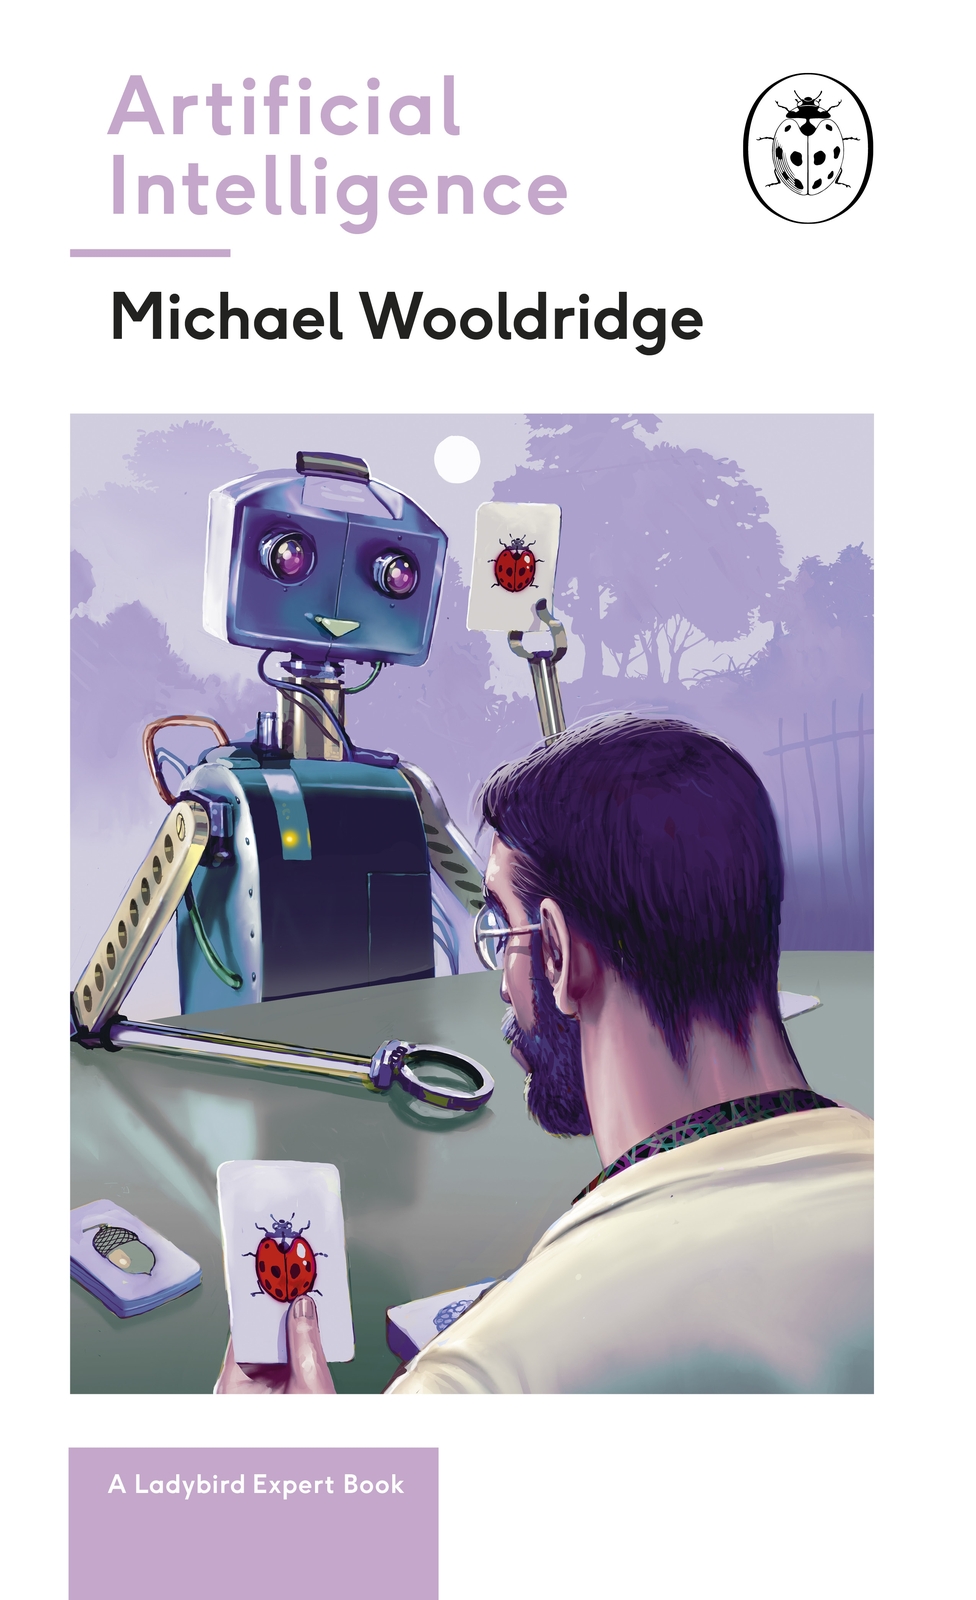 Michael Wooldridge ARTIFICIAL INTELLIGENCE with illustrations by Stephen Player - photo 1